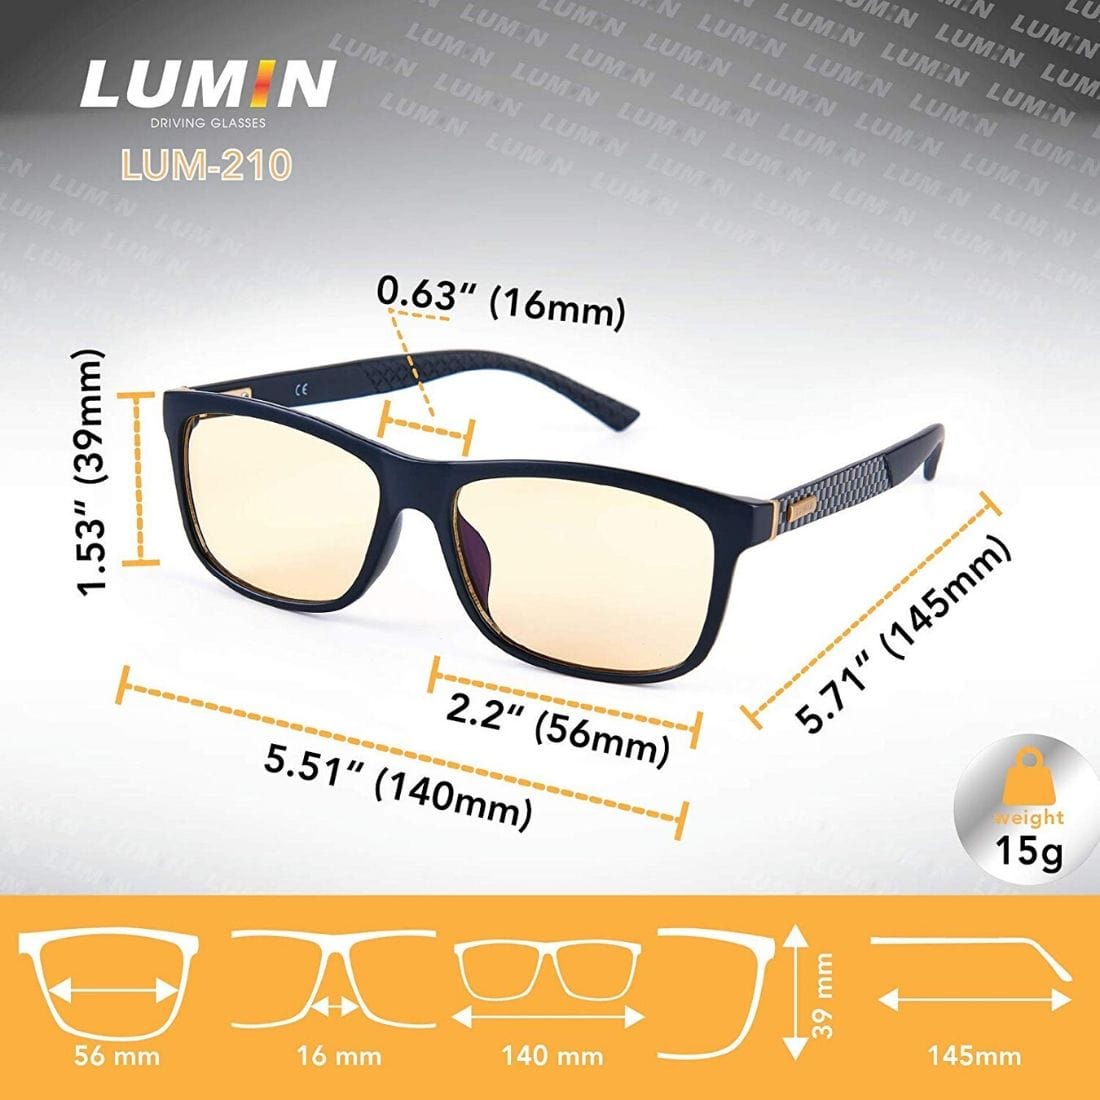 Prospek Lumin Driving Glasses Shift - All-Weather Glasses for Rain, Fog, and Night Driving - Improve Road Safety - Unisex